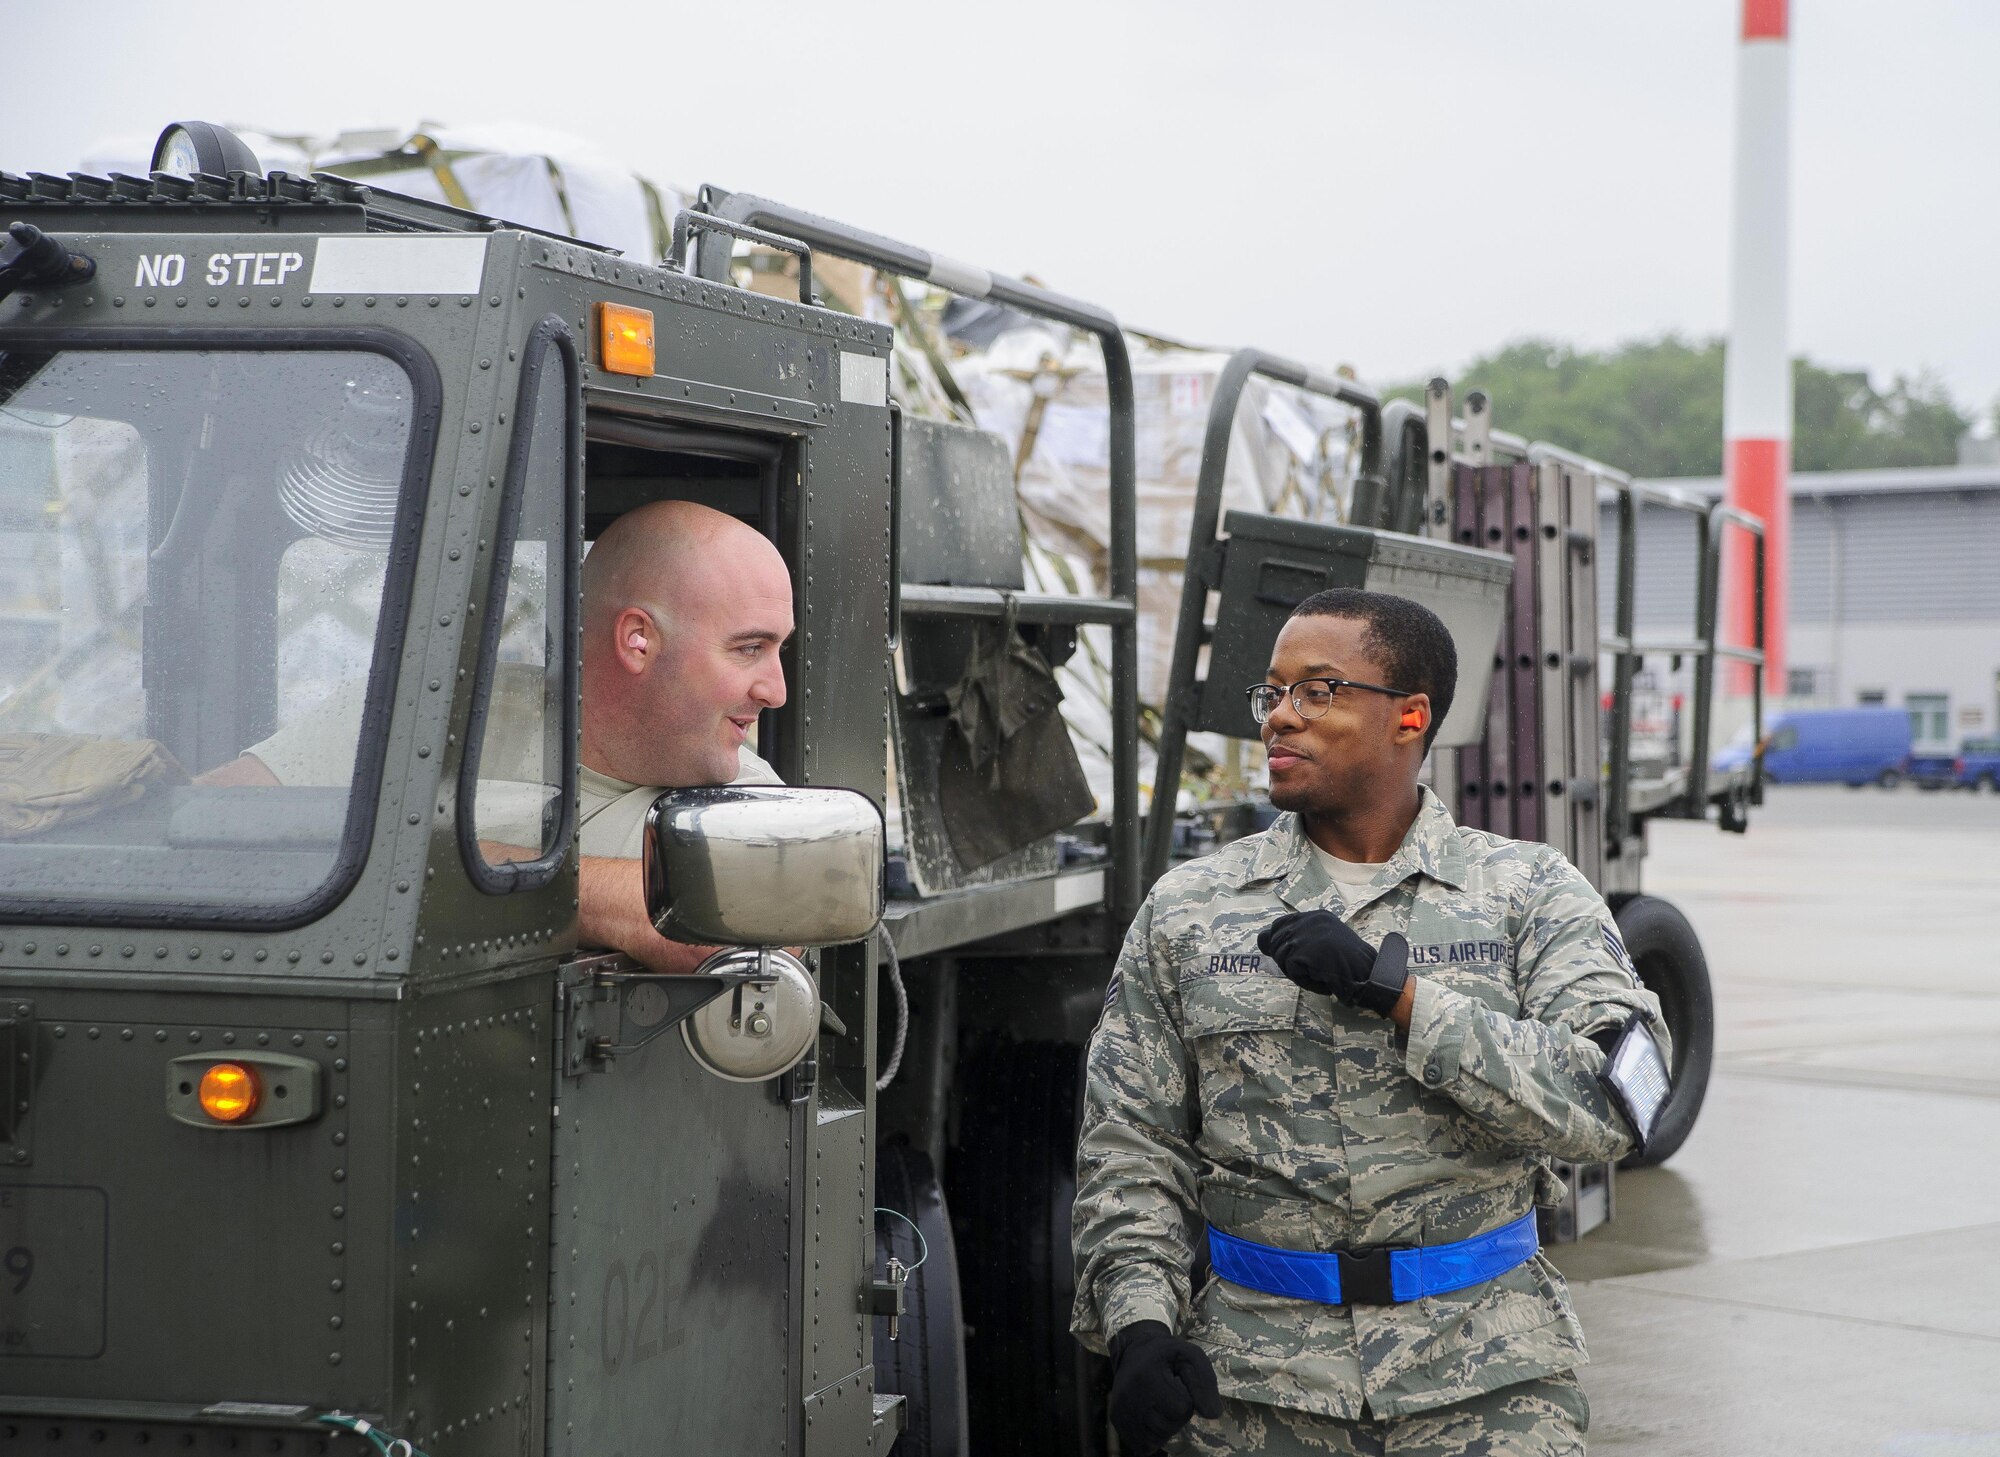 Staff Sgt. Anthony Pokorny and Senior Airman Ronnie Baker, Air Transportation Journeymen with the 81st Aerial Port Squadron out of Joint Base Charleston, S.C., prepare to offload air cargo on the ramp at Ramstein AB, Germany, July 12, 2017.  Citizen Airmen of the 81st APS performed two weeks of annual training at Ramstein in order to maintain readiness and familiarization with high-volume aerial port operations.  (U.S. Air Force photo by Senior Airman Jonathan Lane)